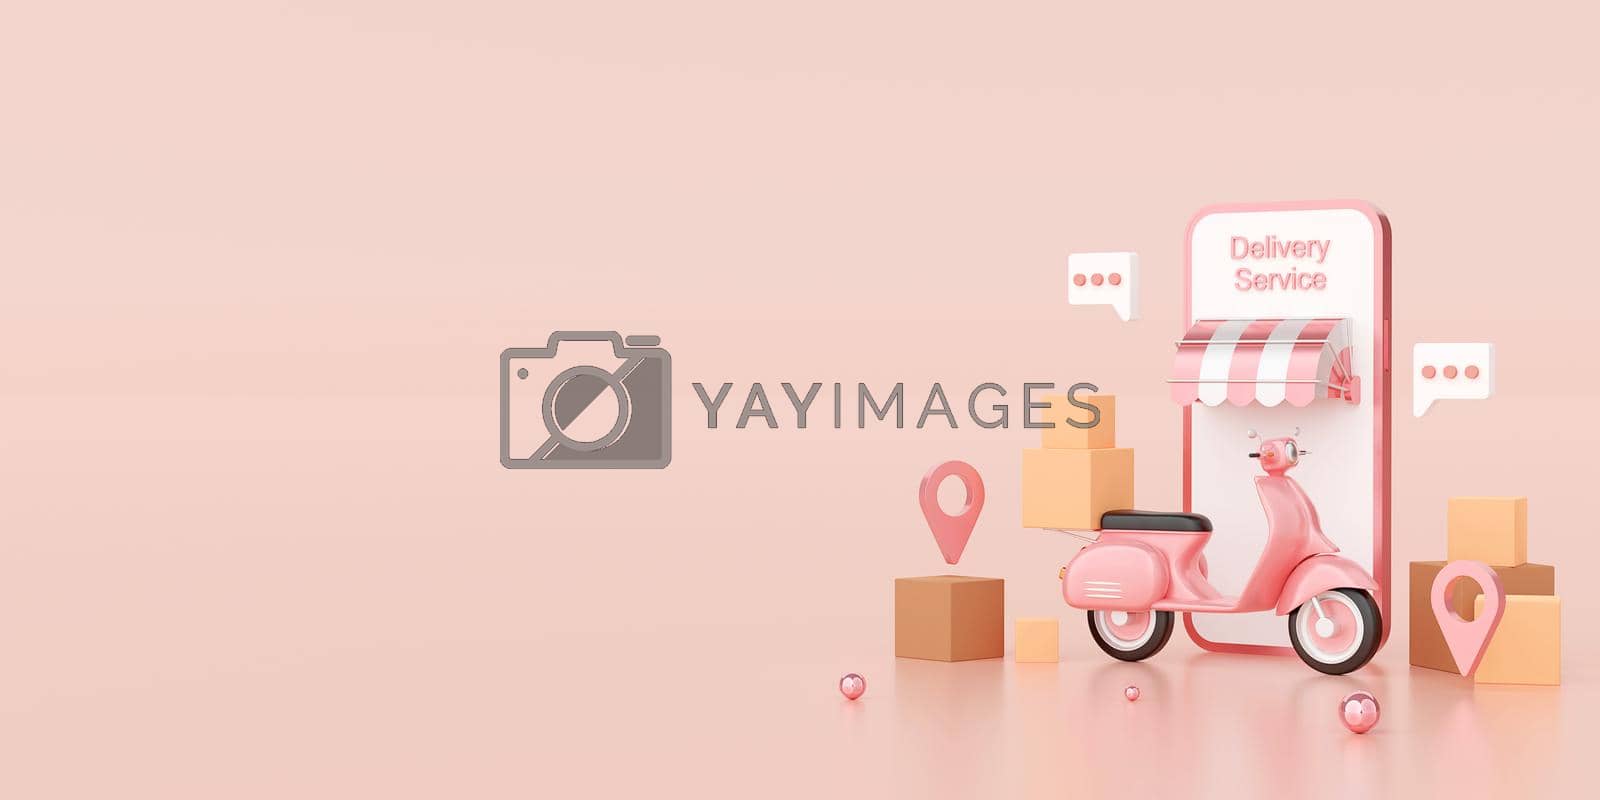 Royalty free image of Delivery service on mobile application, Transportation or food delivery by scooter, 3d illustration by nutzchotwarut